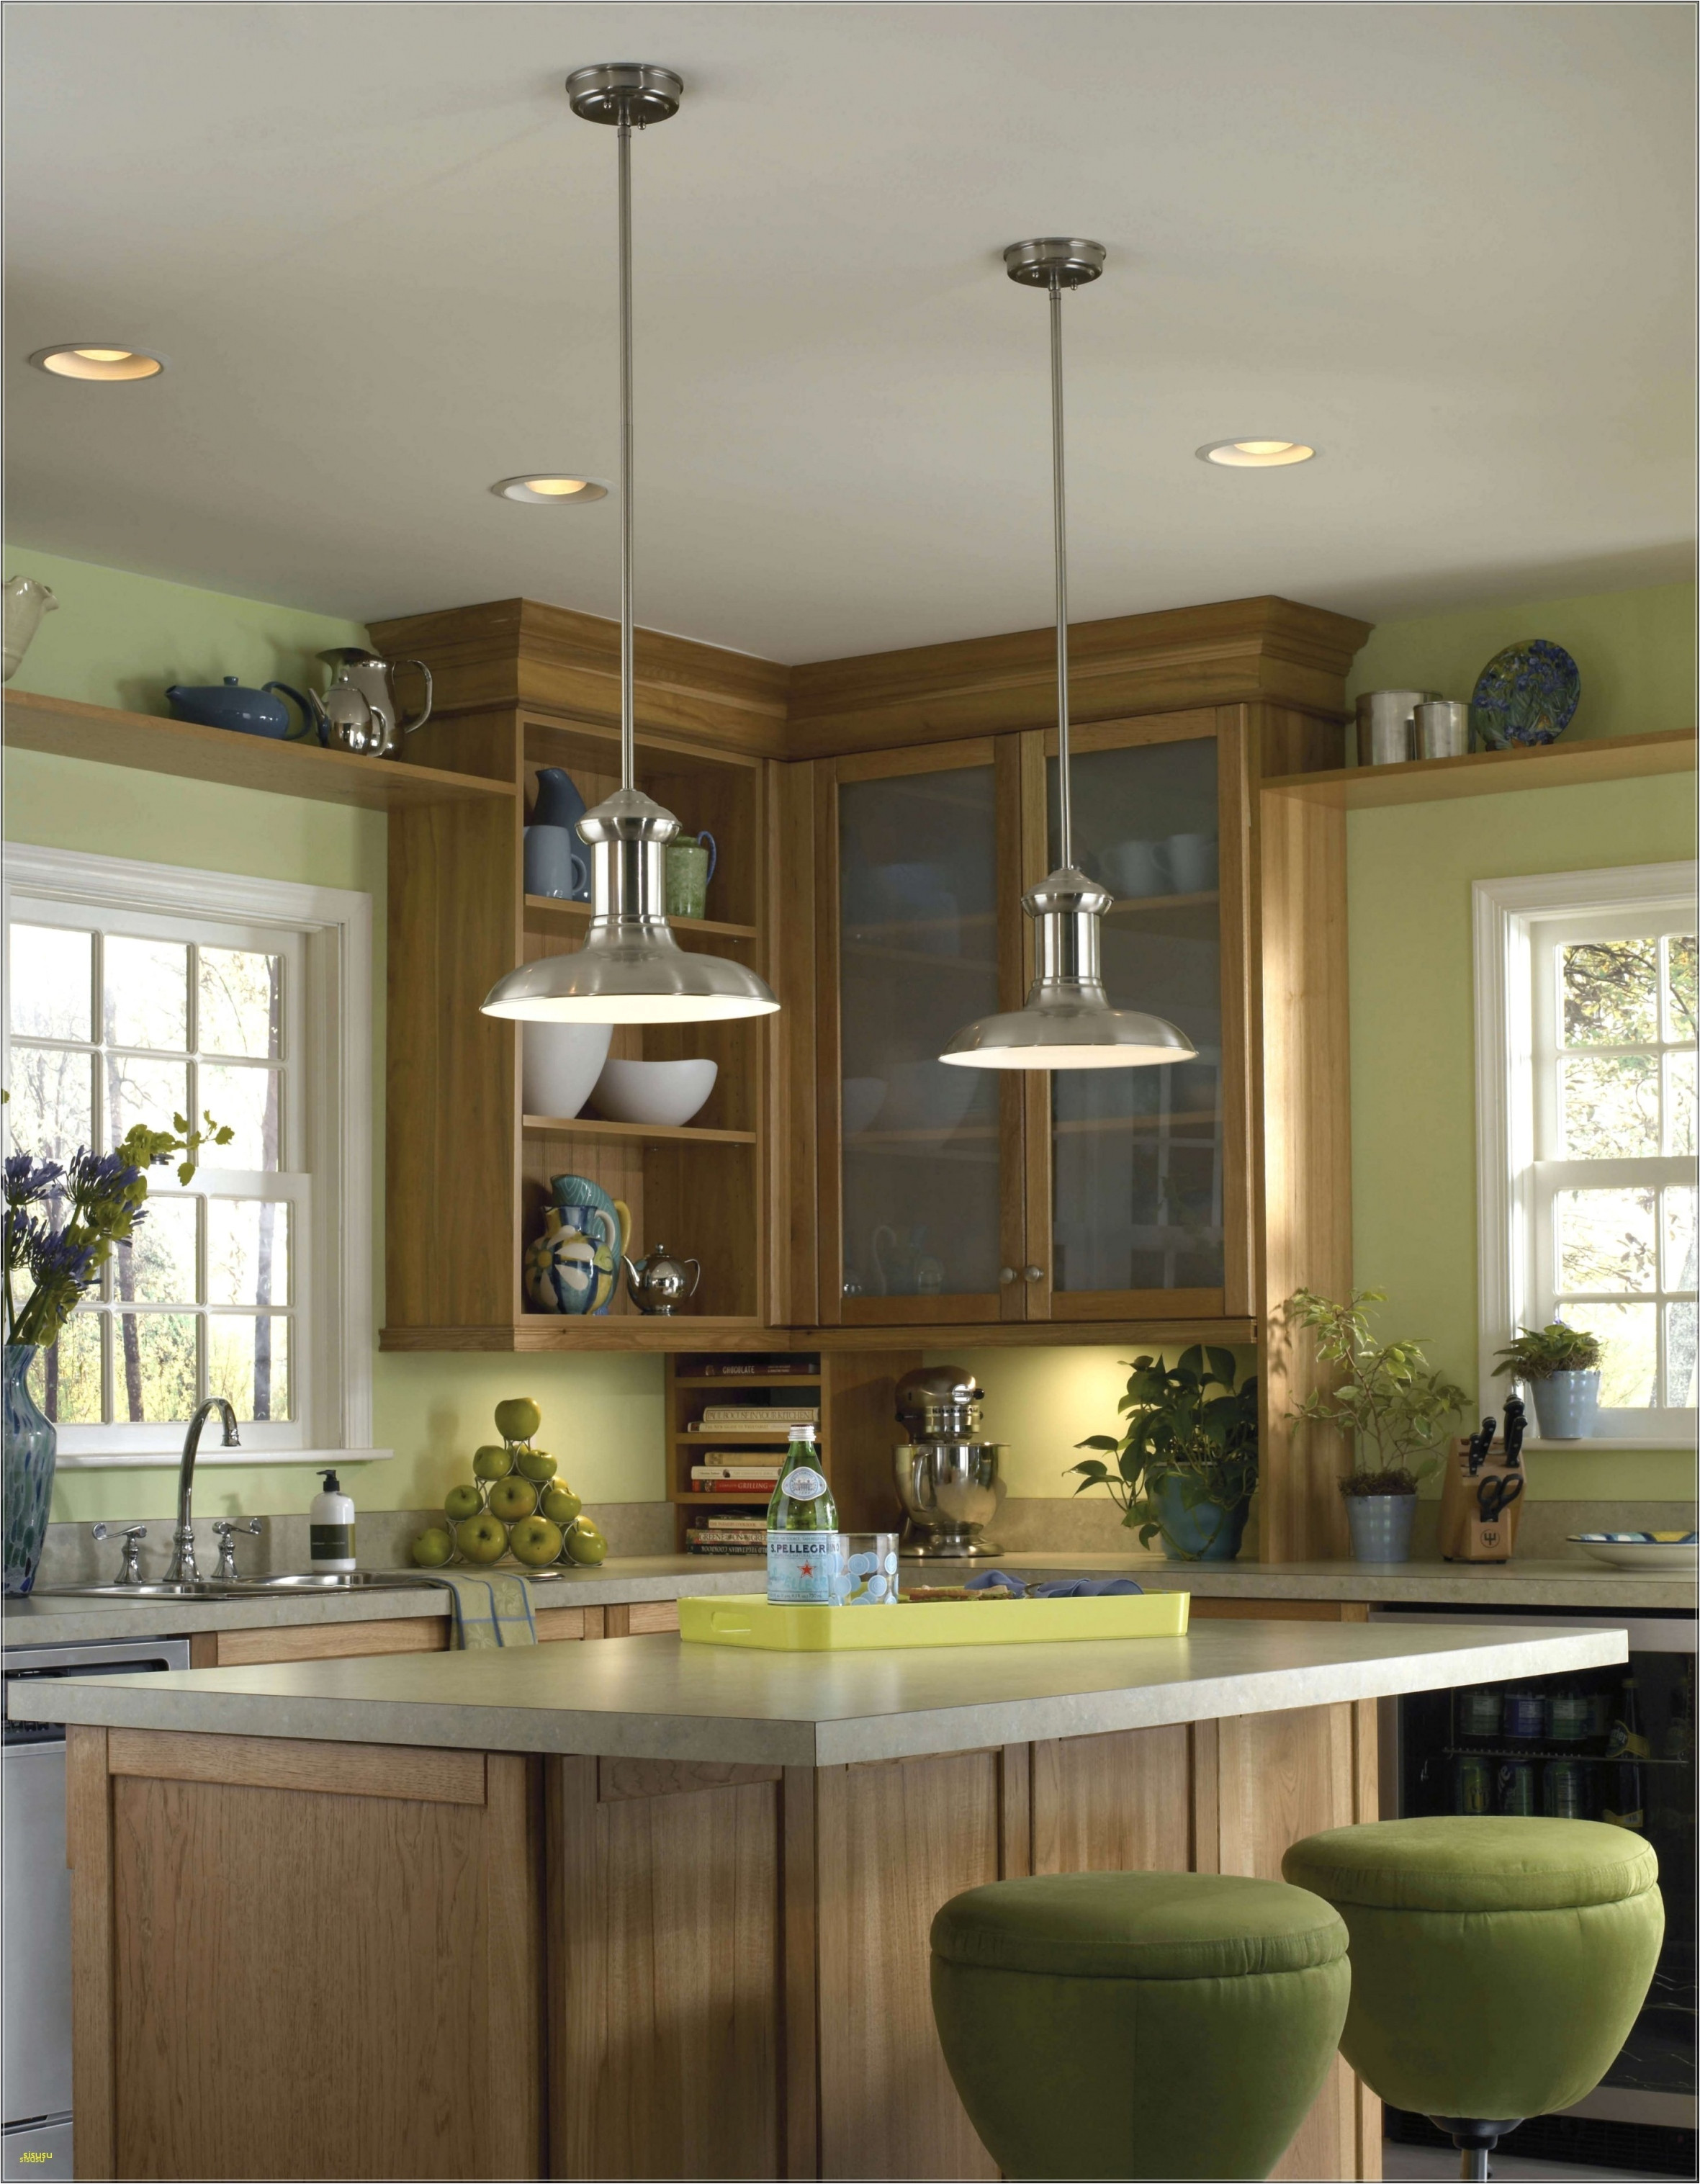 image of new recessed lighting for kitchen